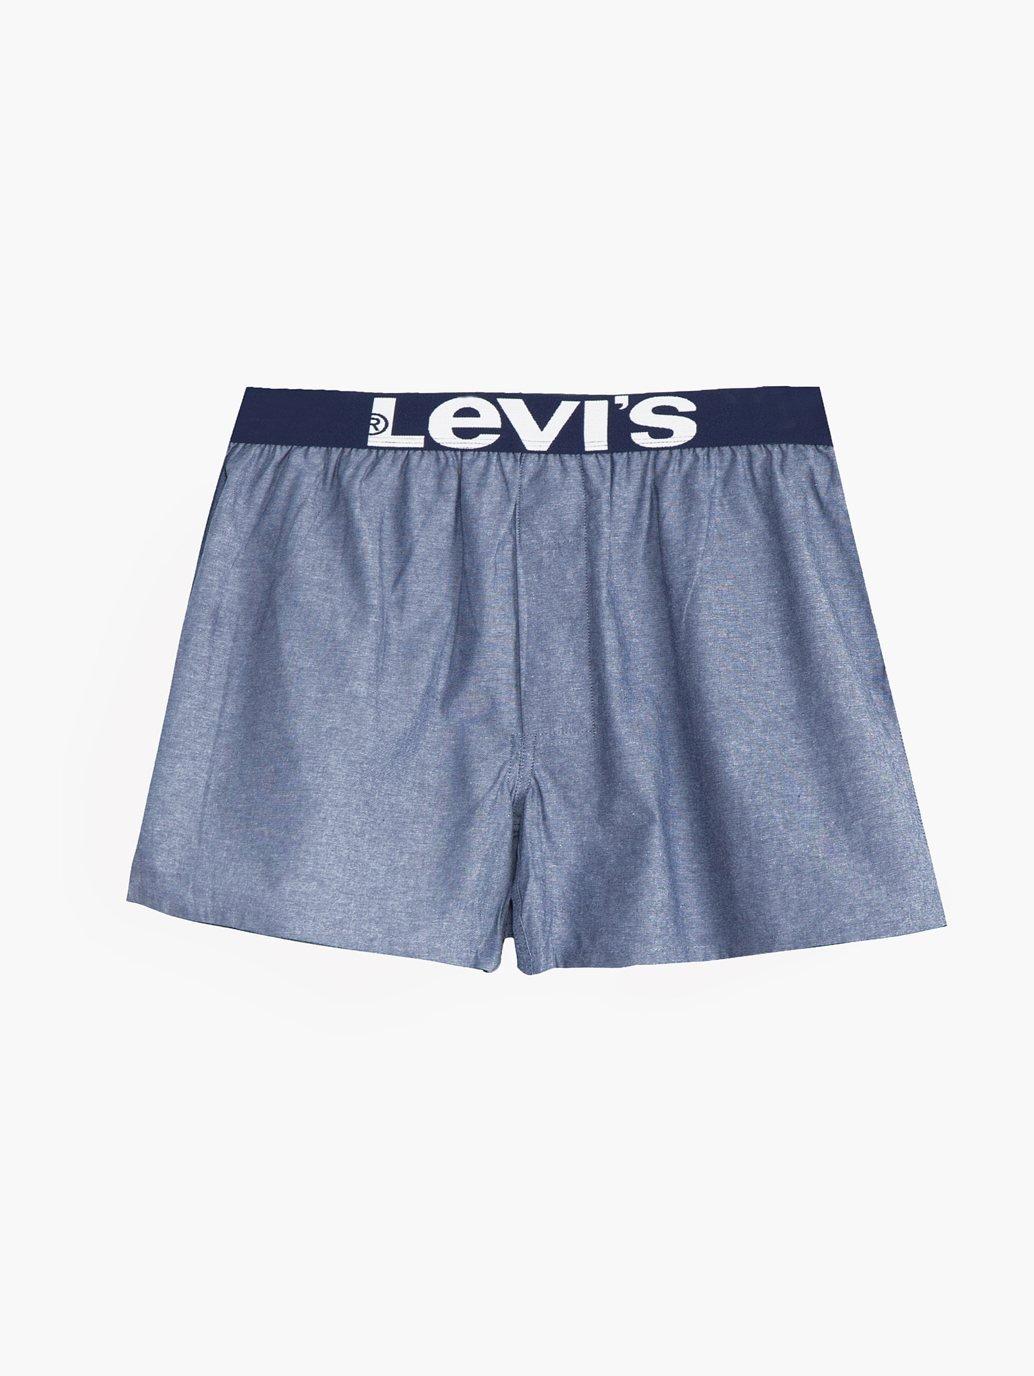 Buy Levi's® Men's Chambray Boxers | Levi's® Official Online Store MY